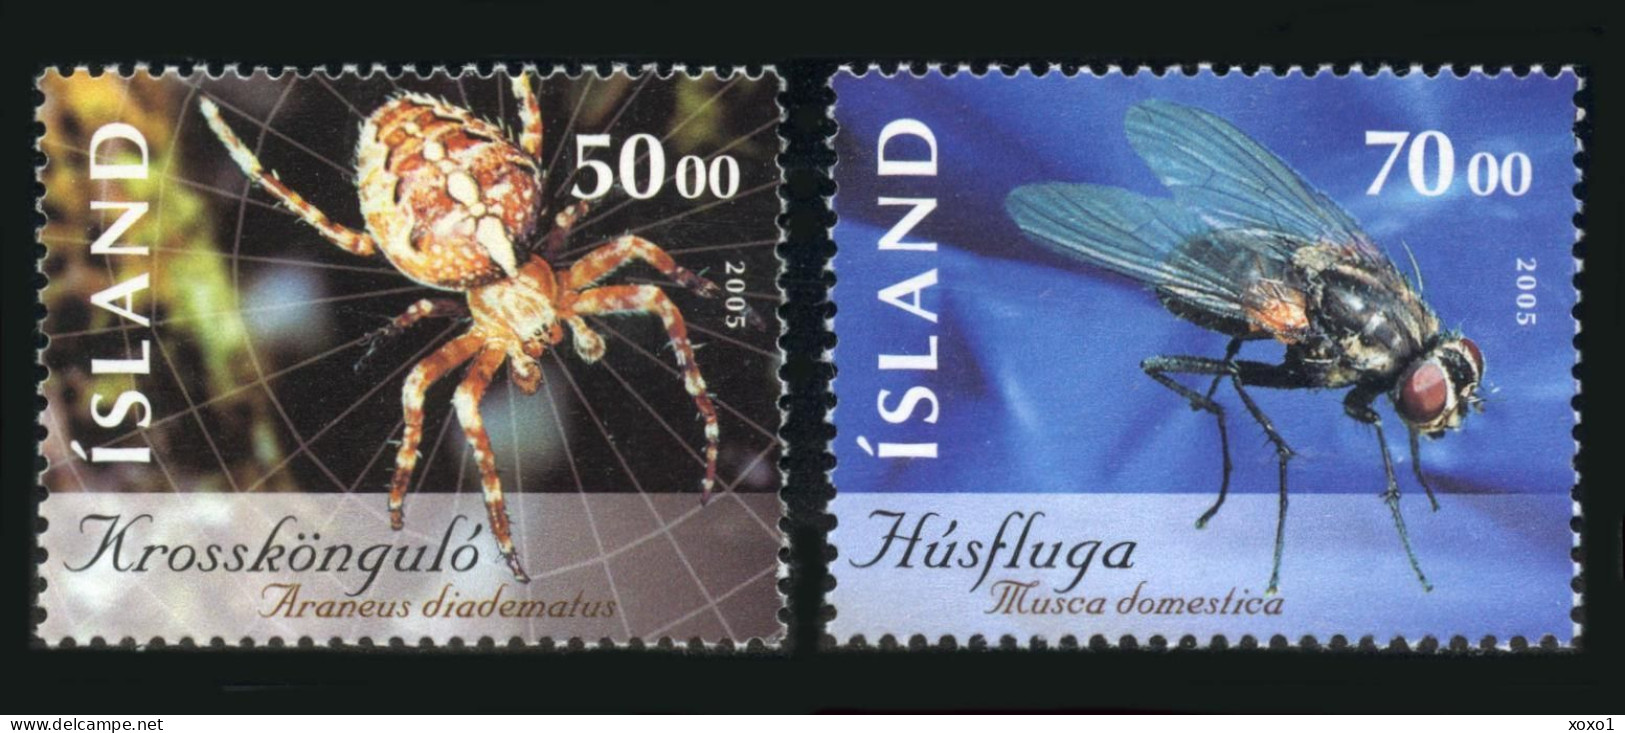 Iceland 2005  MiNr. 1075 - 1076 Island Insects And Spiders  # 2     2v  MNH** 3.50 € - Kevers